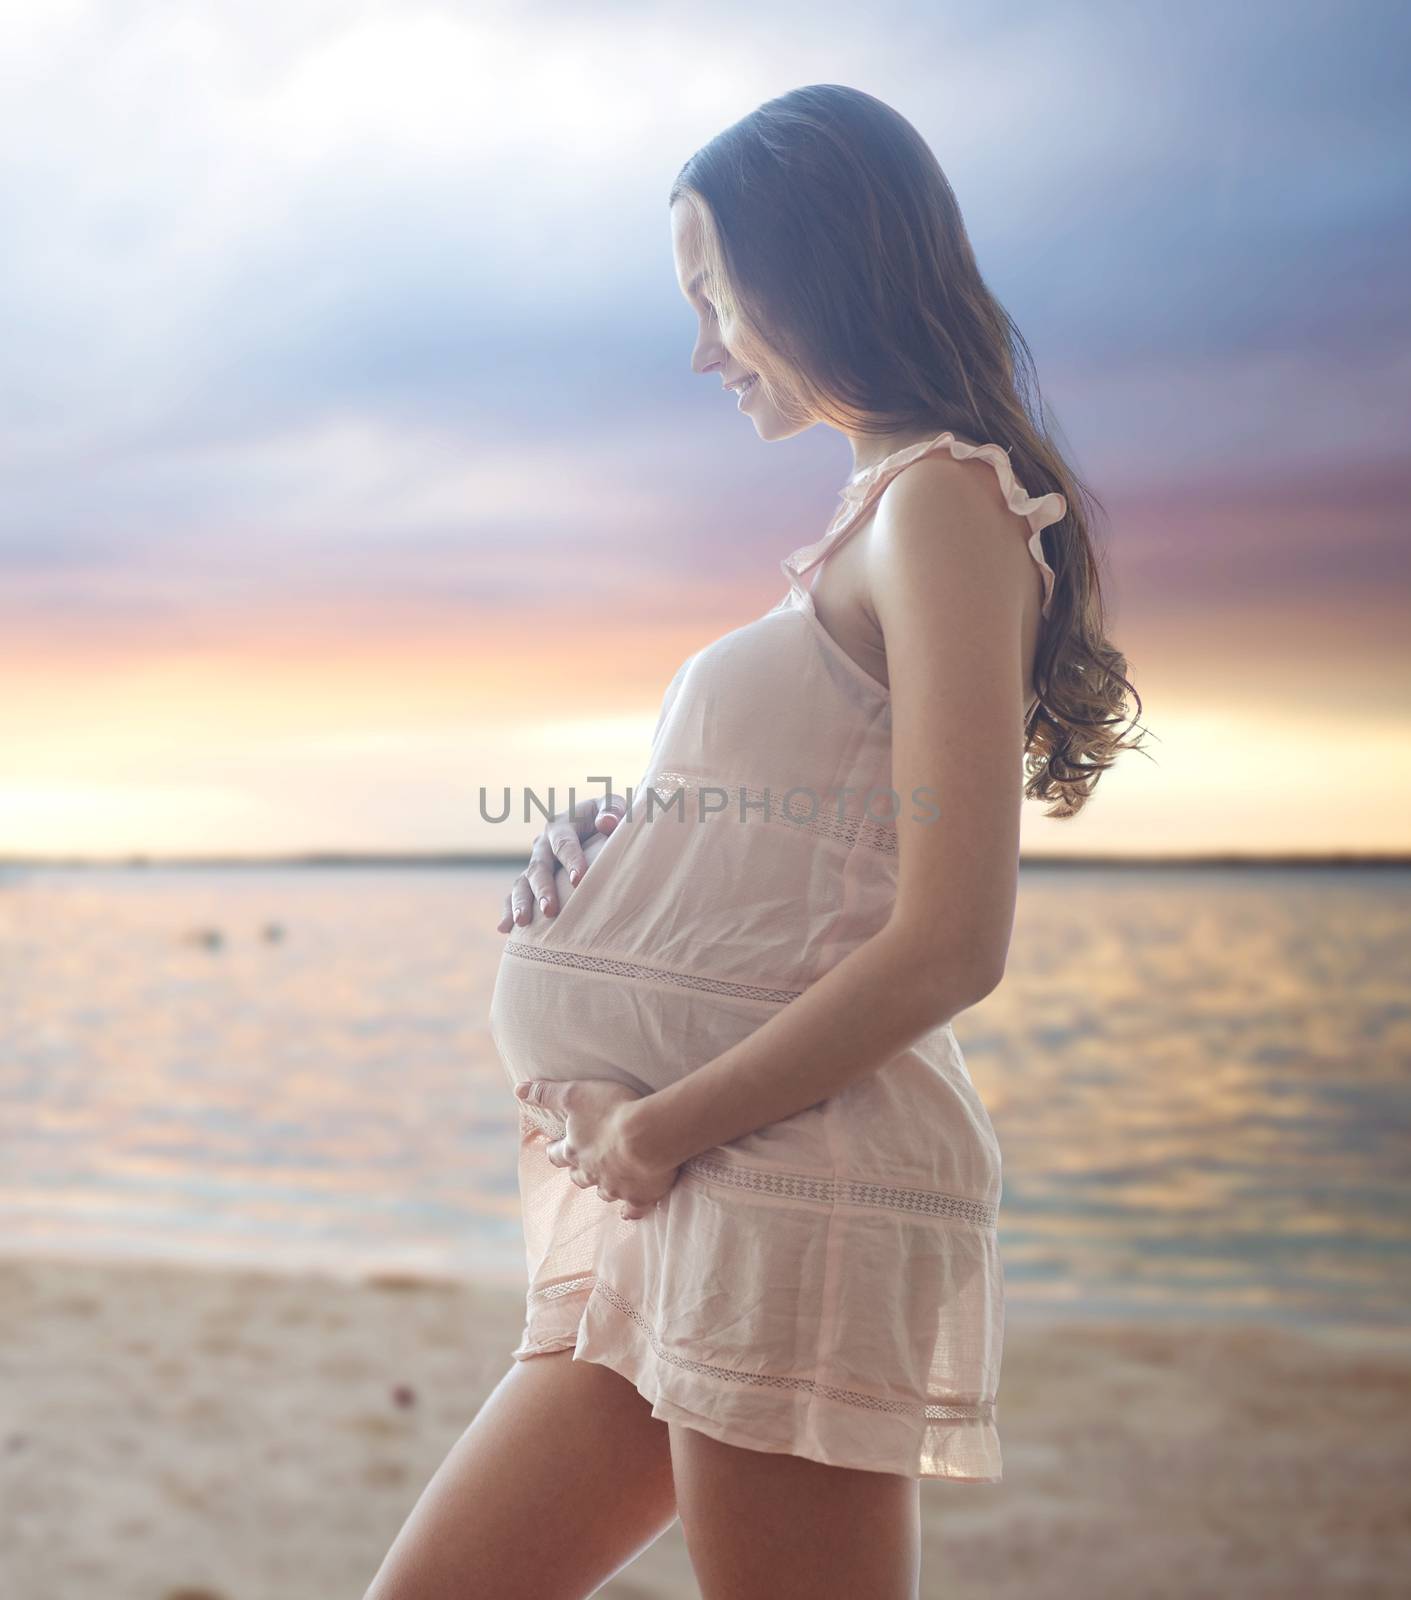 pregnancy, motherhood, people and expectation concept - happy pregnant woman in chemise over sunset on beach background